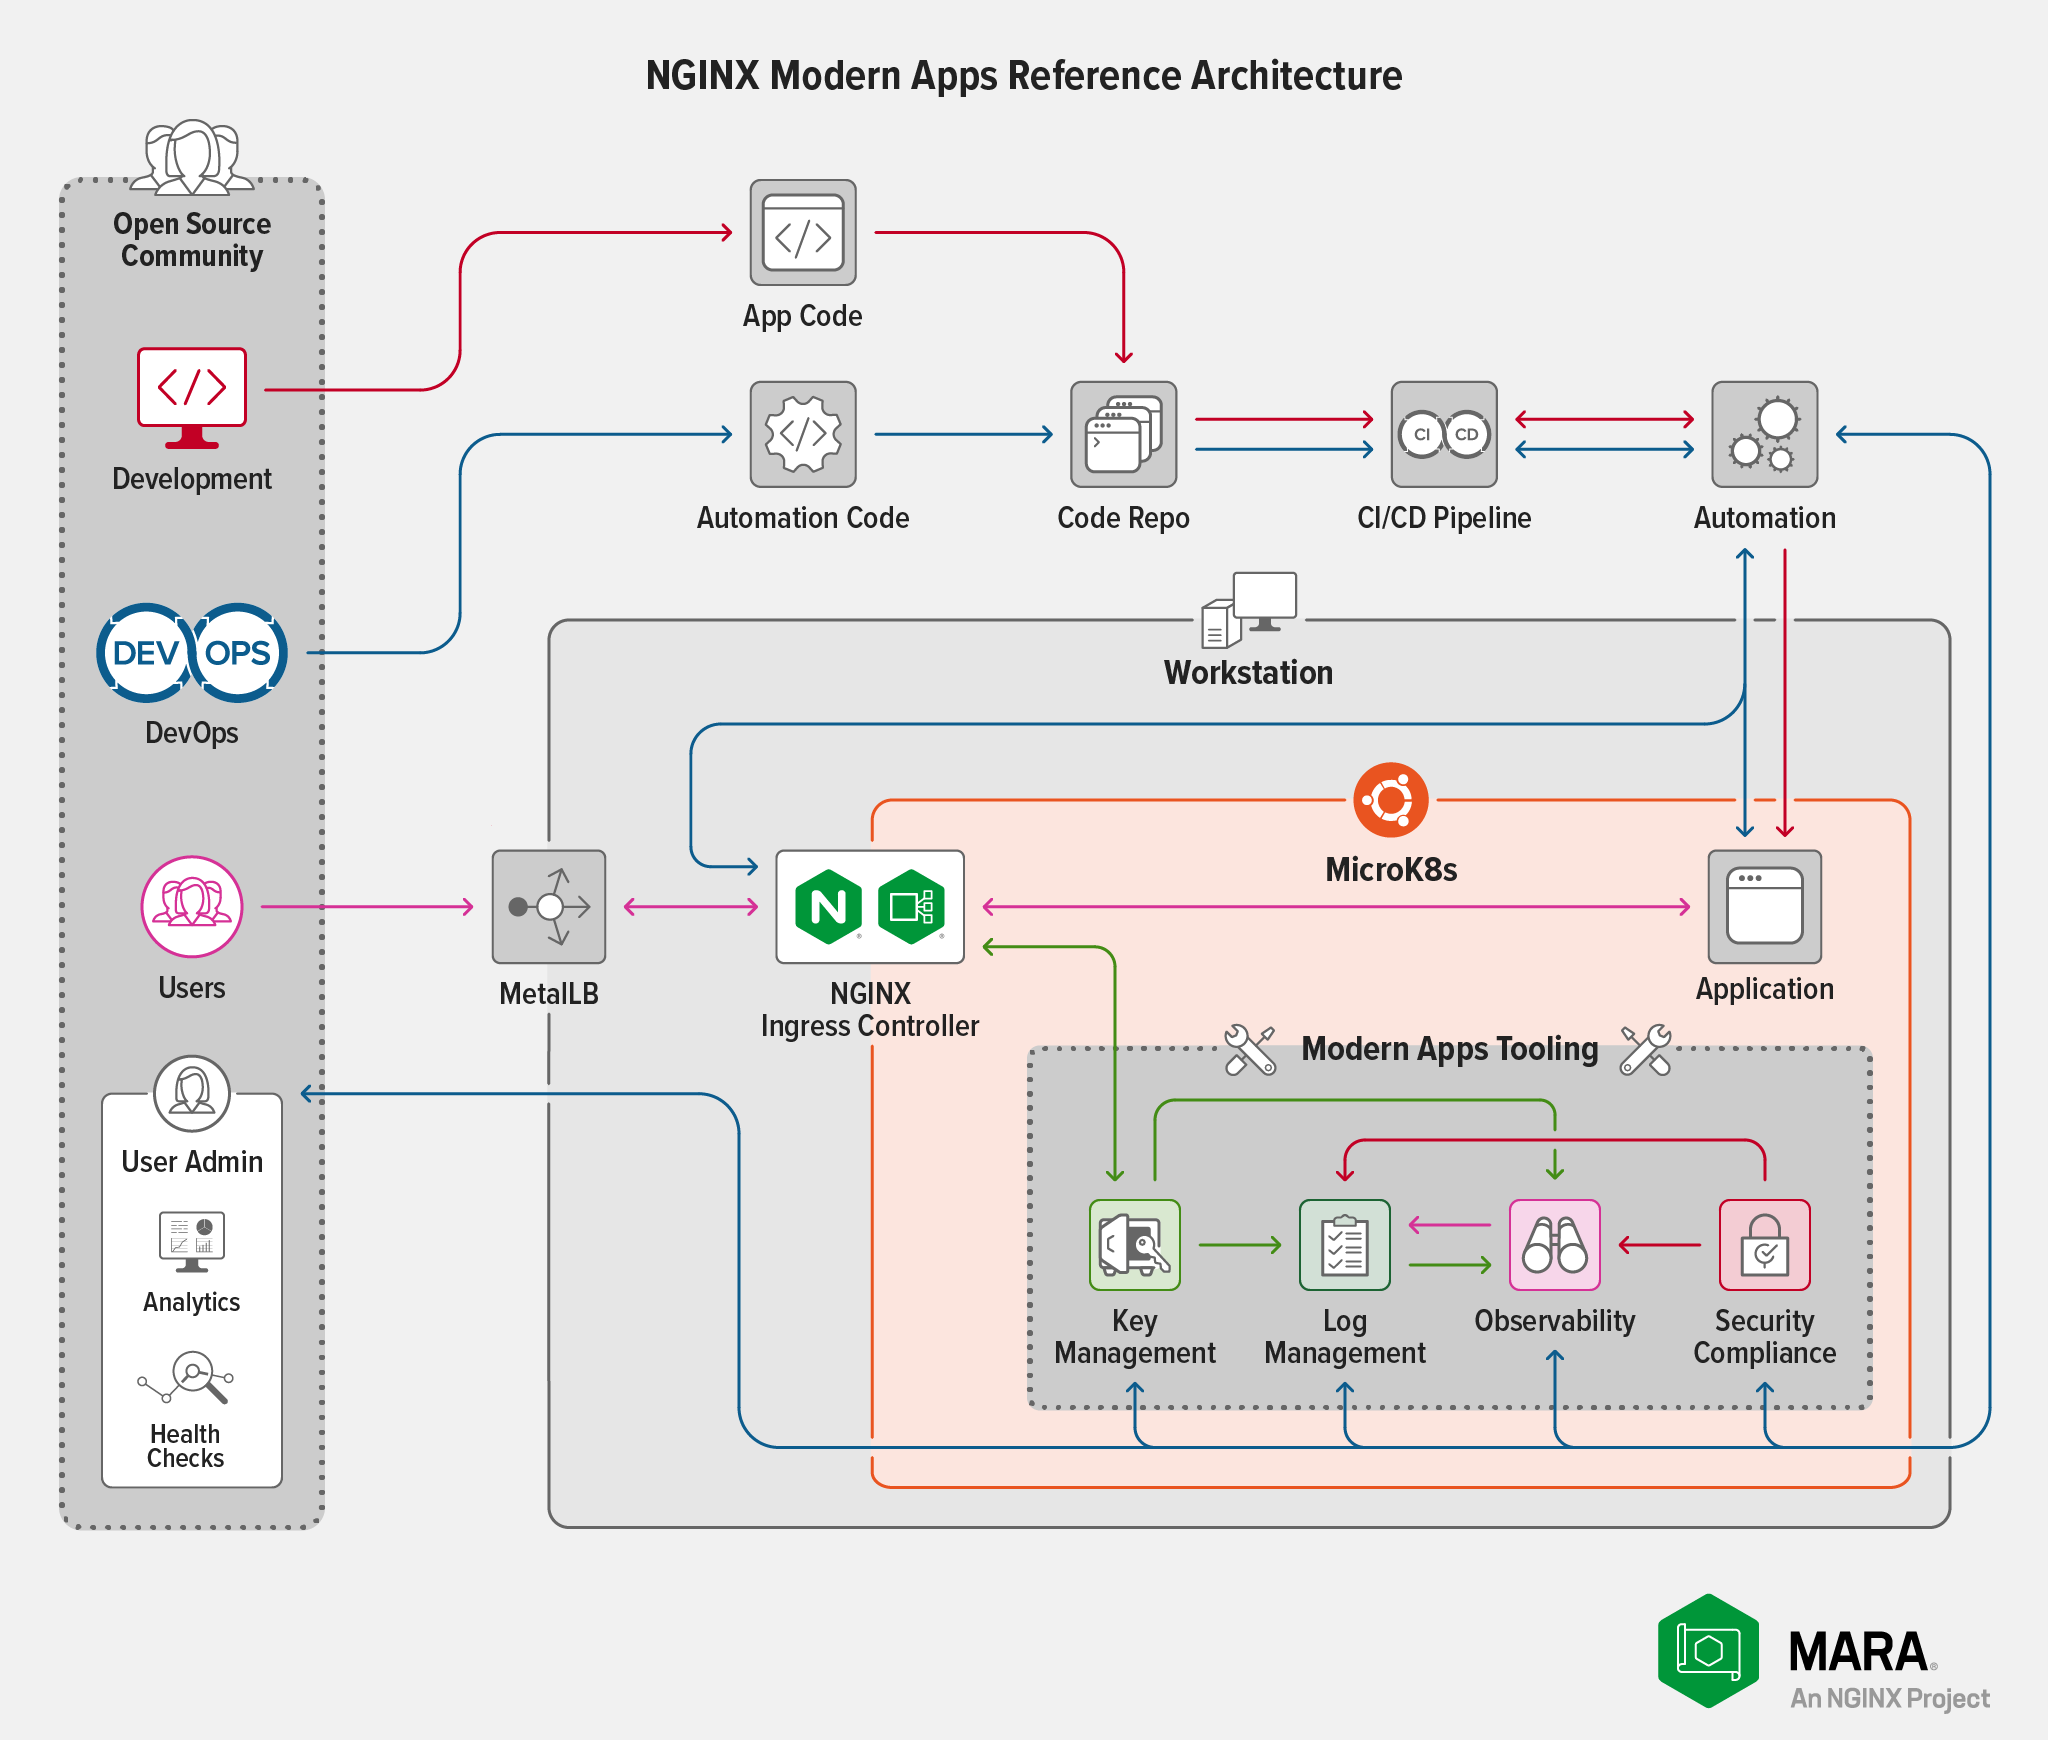 Diagram showing topology of the NGINX Modern Apps Reference Architecture running on a workstation